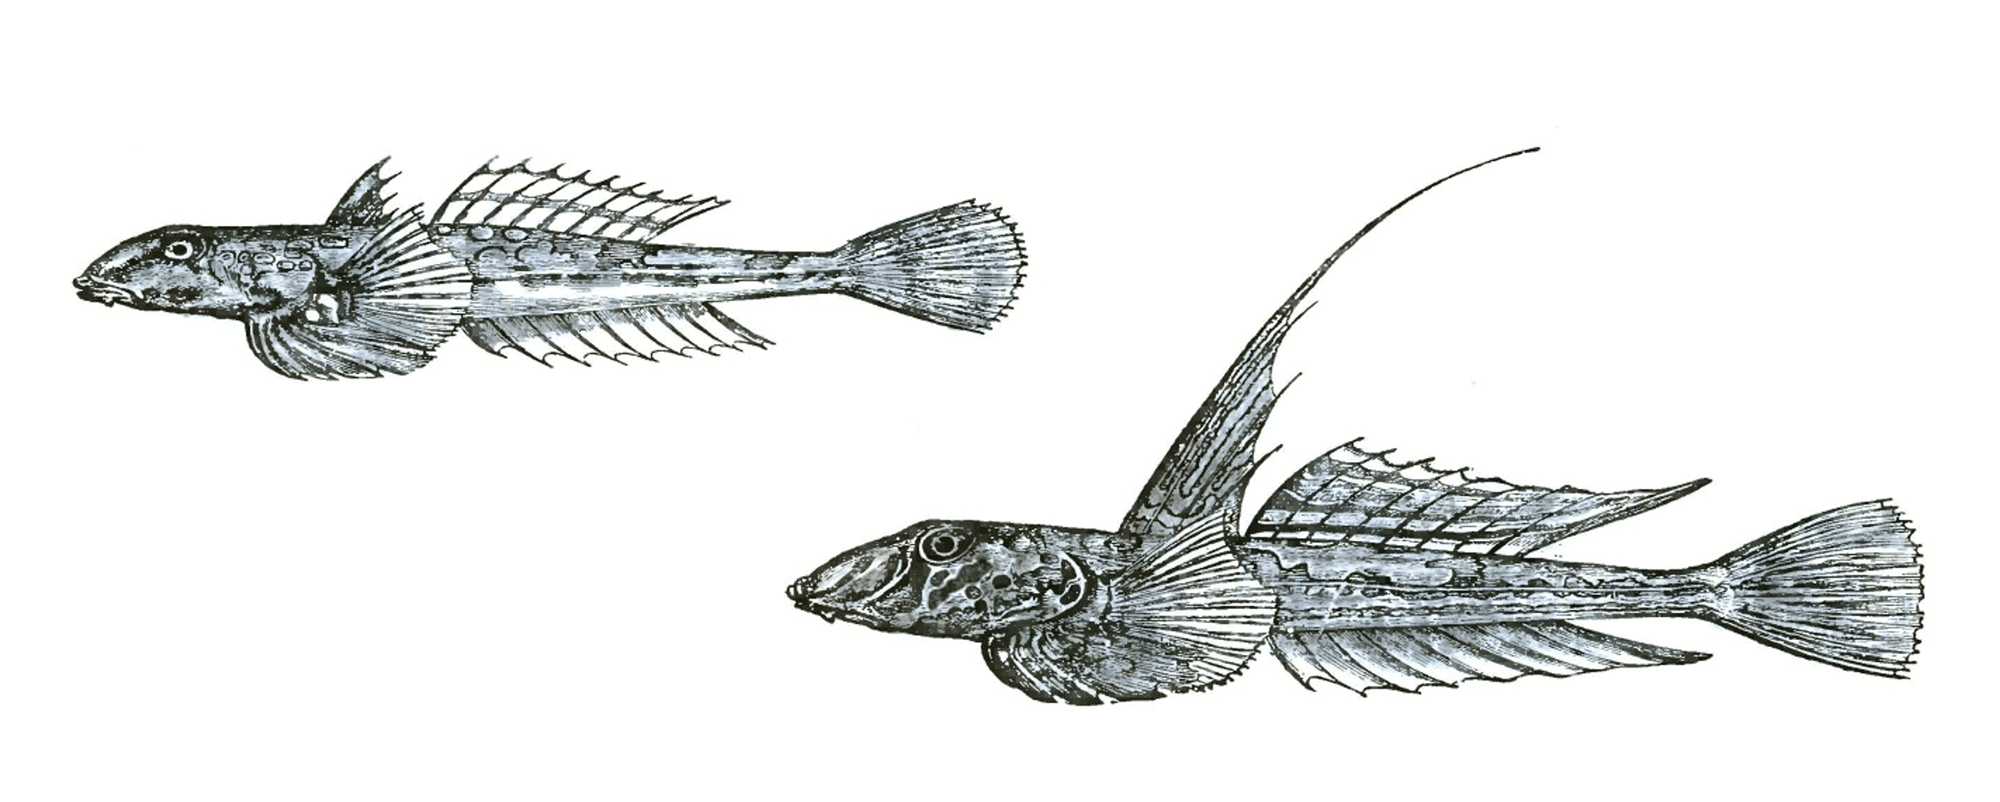 Image showing drawings of two dragonet fish.